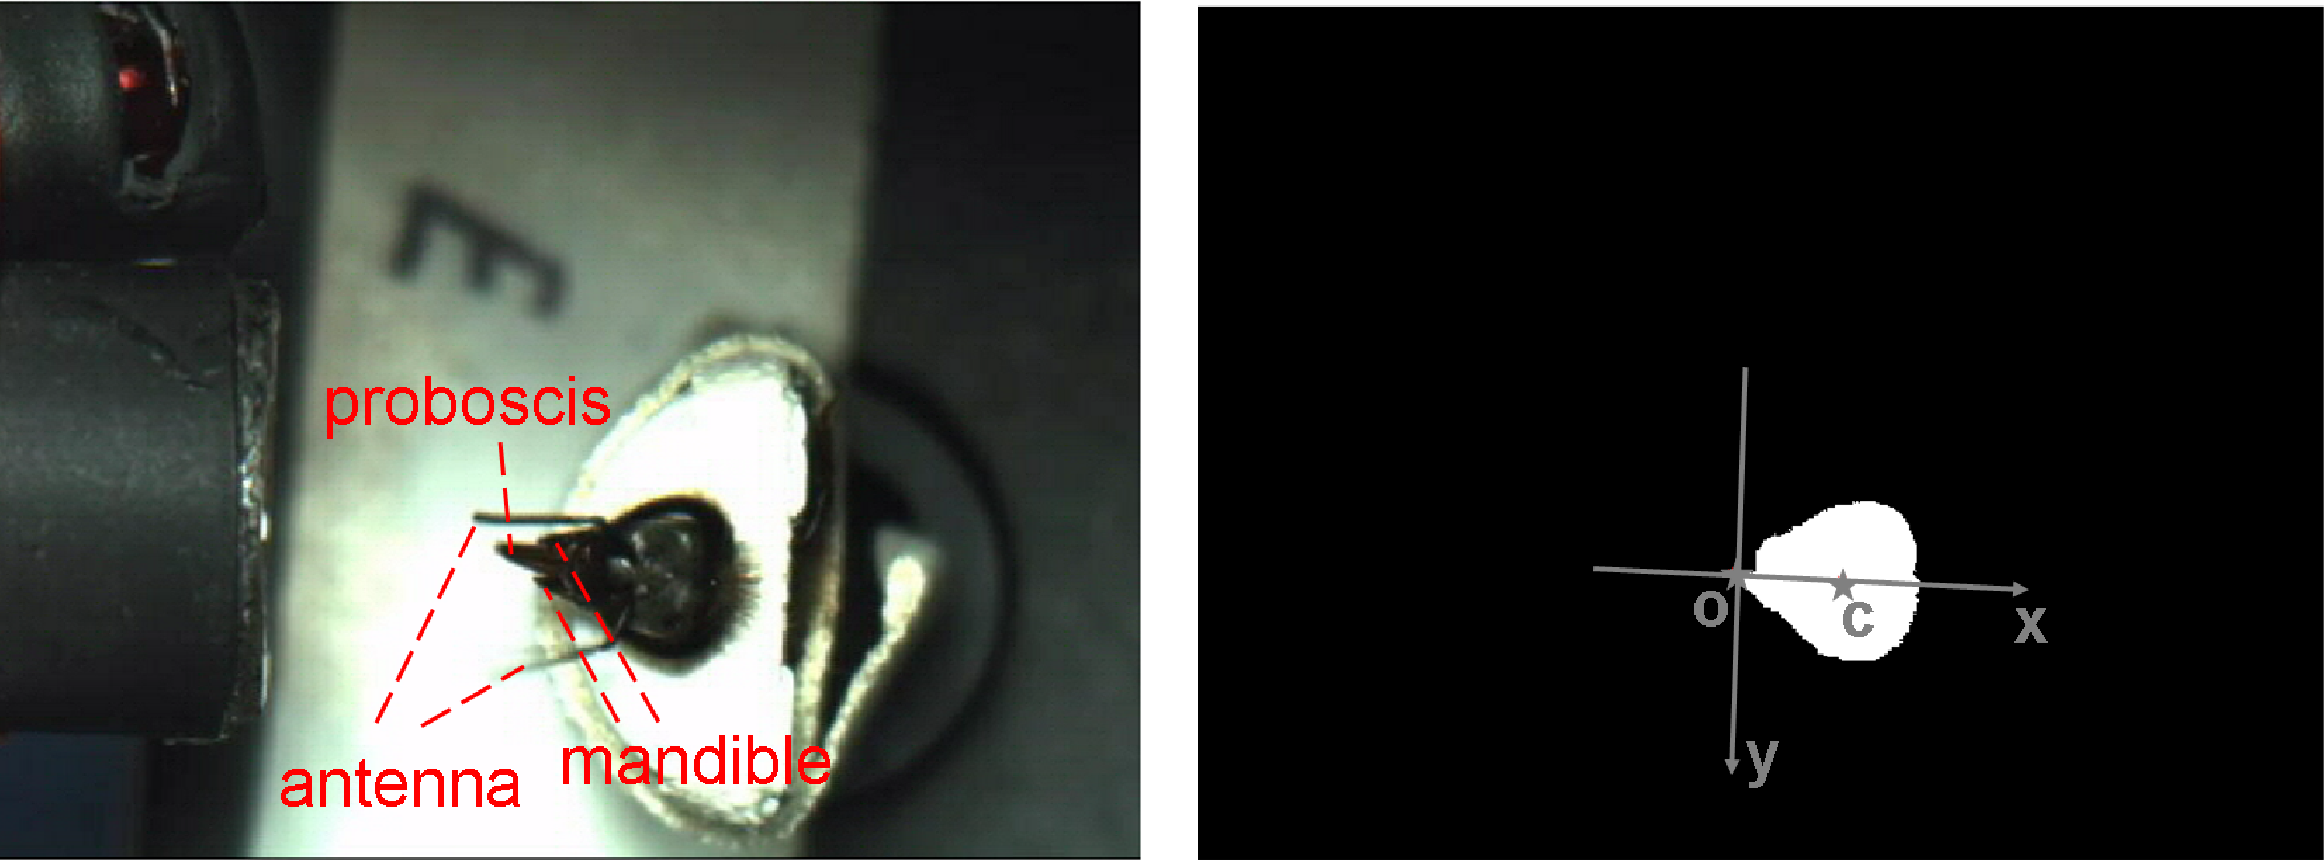 Teaser of Automatic framework for tracking honeybeeś antennae and mouthparts from low framerate video